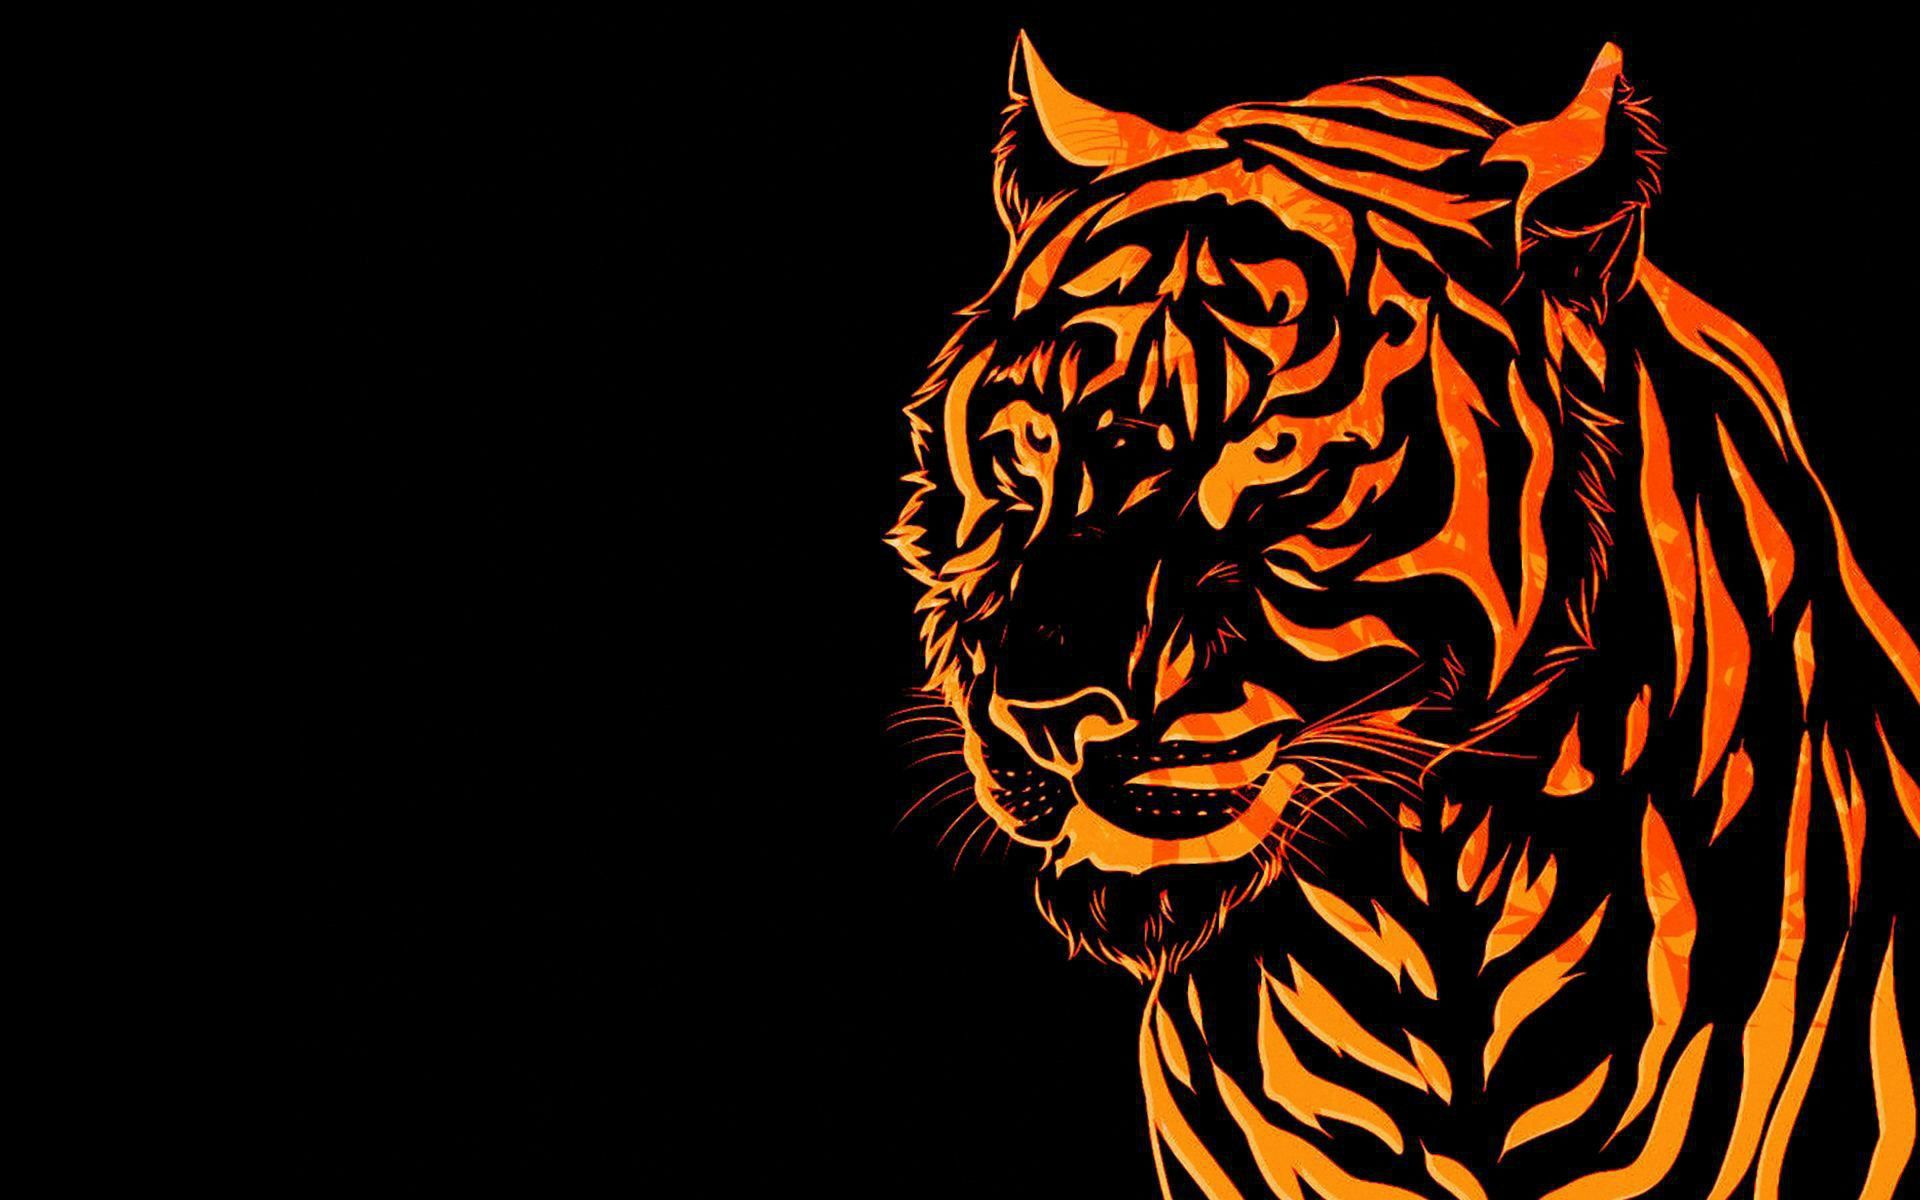 Tiger Wallpaper Hd - Abstract Wallpapers Hd For Mobile Phones - HD Wallpaper 